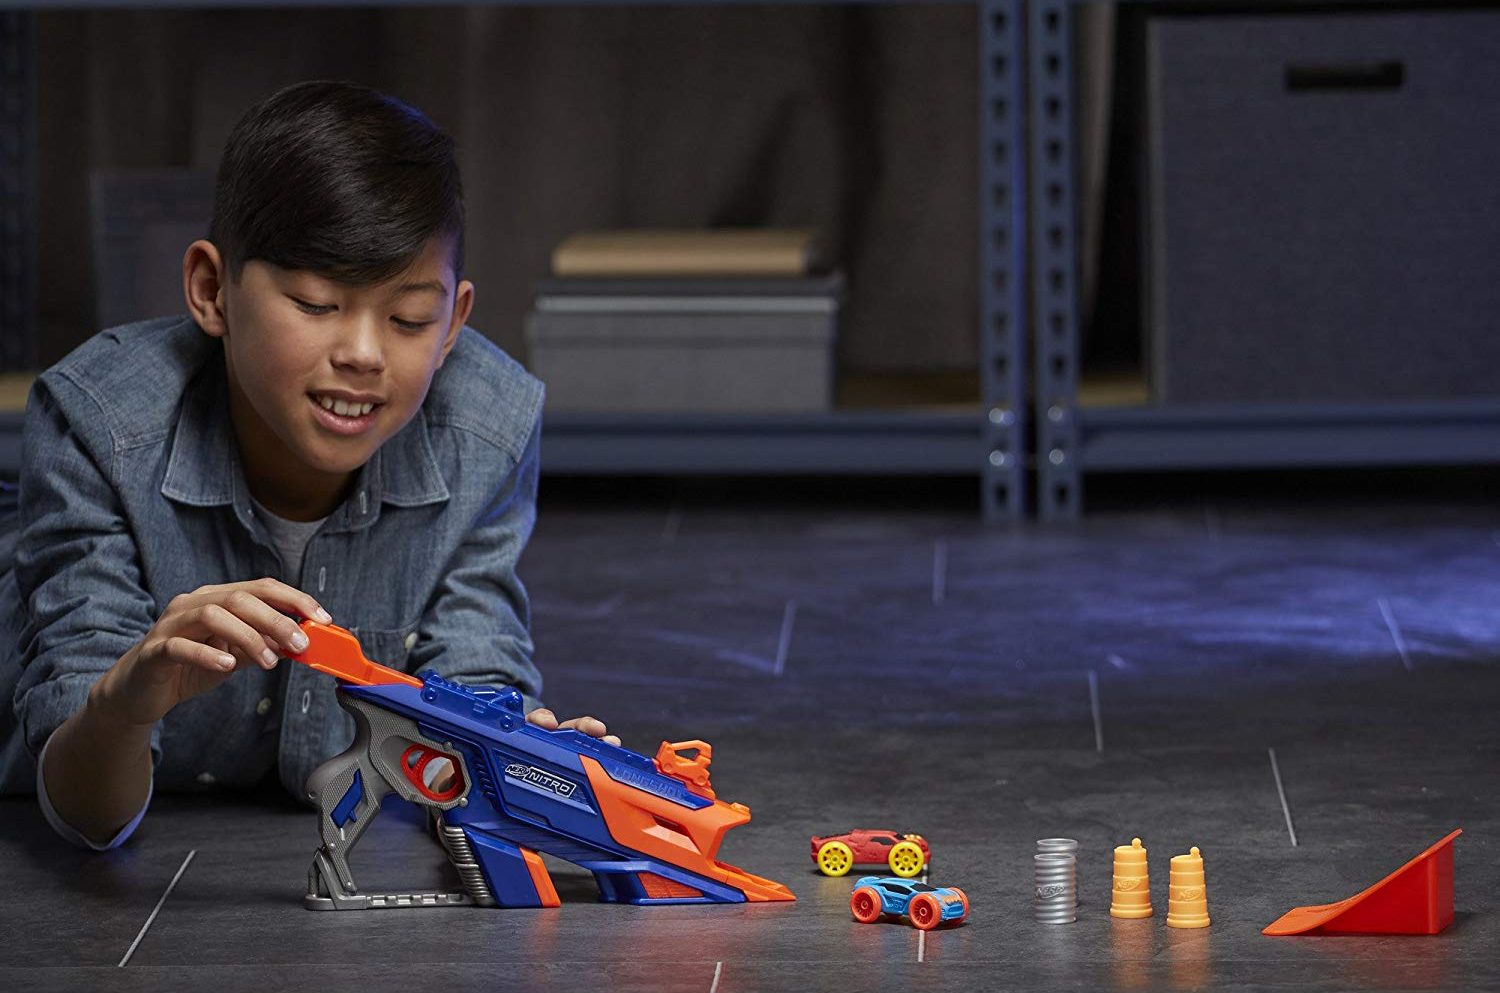 PRICE DROP: Nerf Nitro LongShot Smash Down to $6.37! **Great for the Gift Closet!**